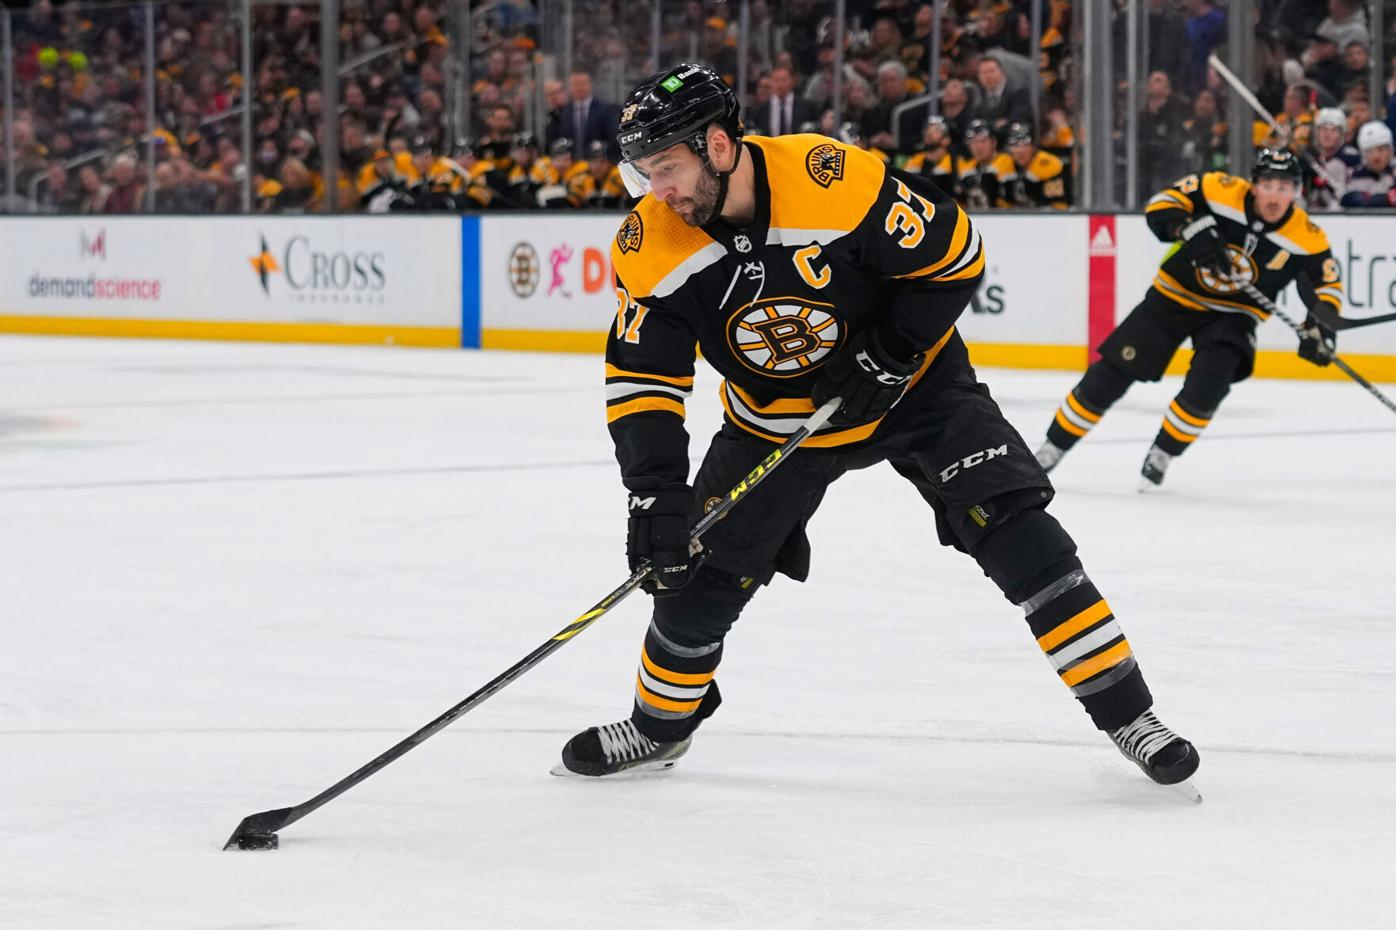 Boston Bruins - Best arrivals ever? The B's walked into